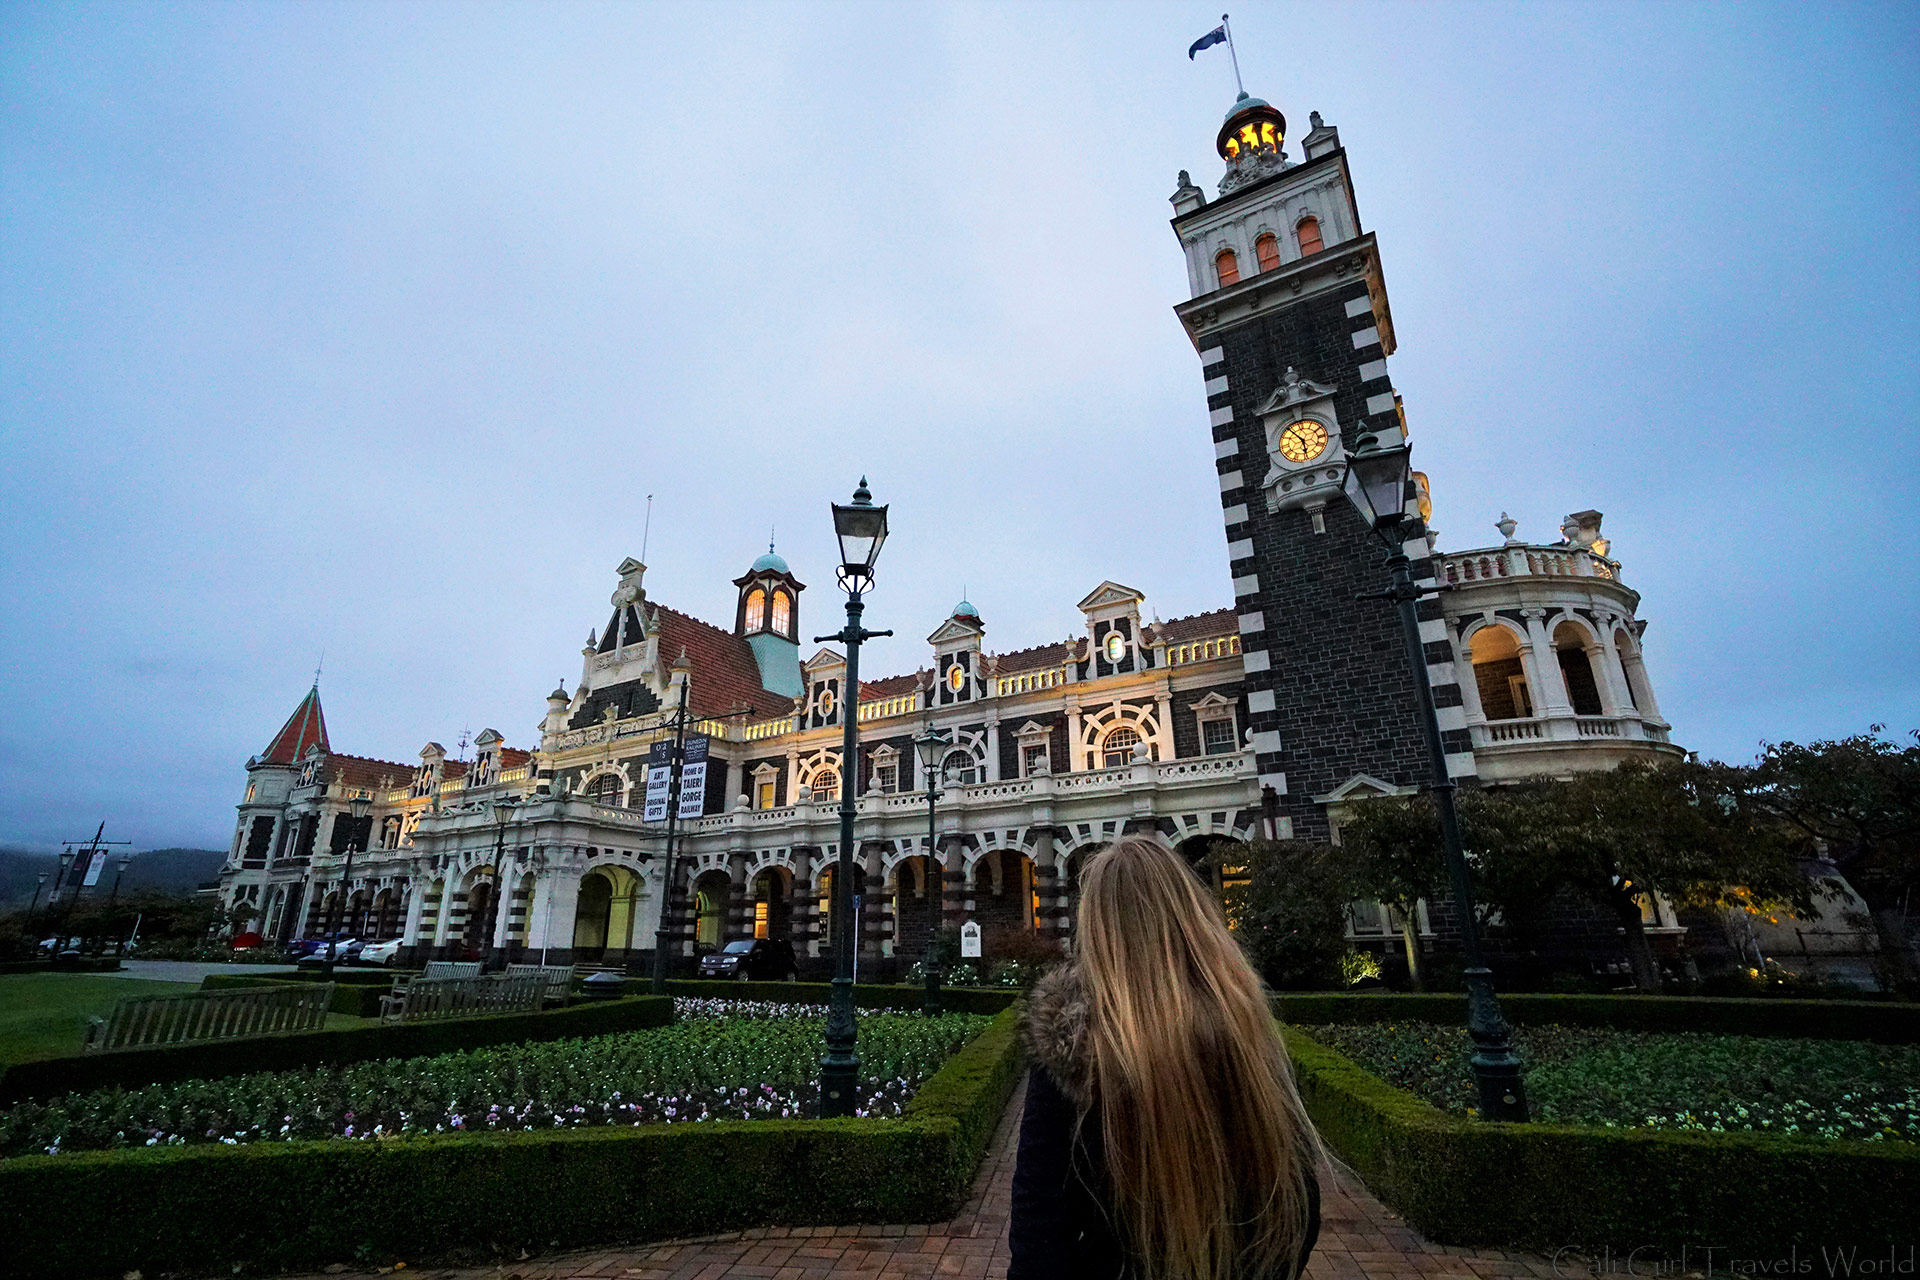 Walking up to the Dunedin train station at dusk, looking forward to seeing the beautiful interior in South Island, NZ.